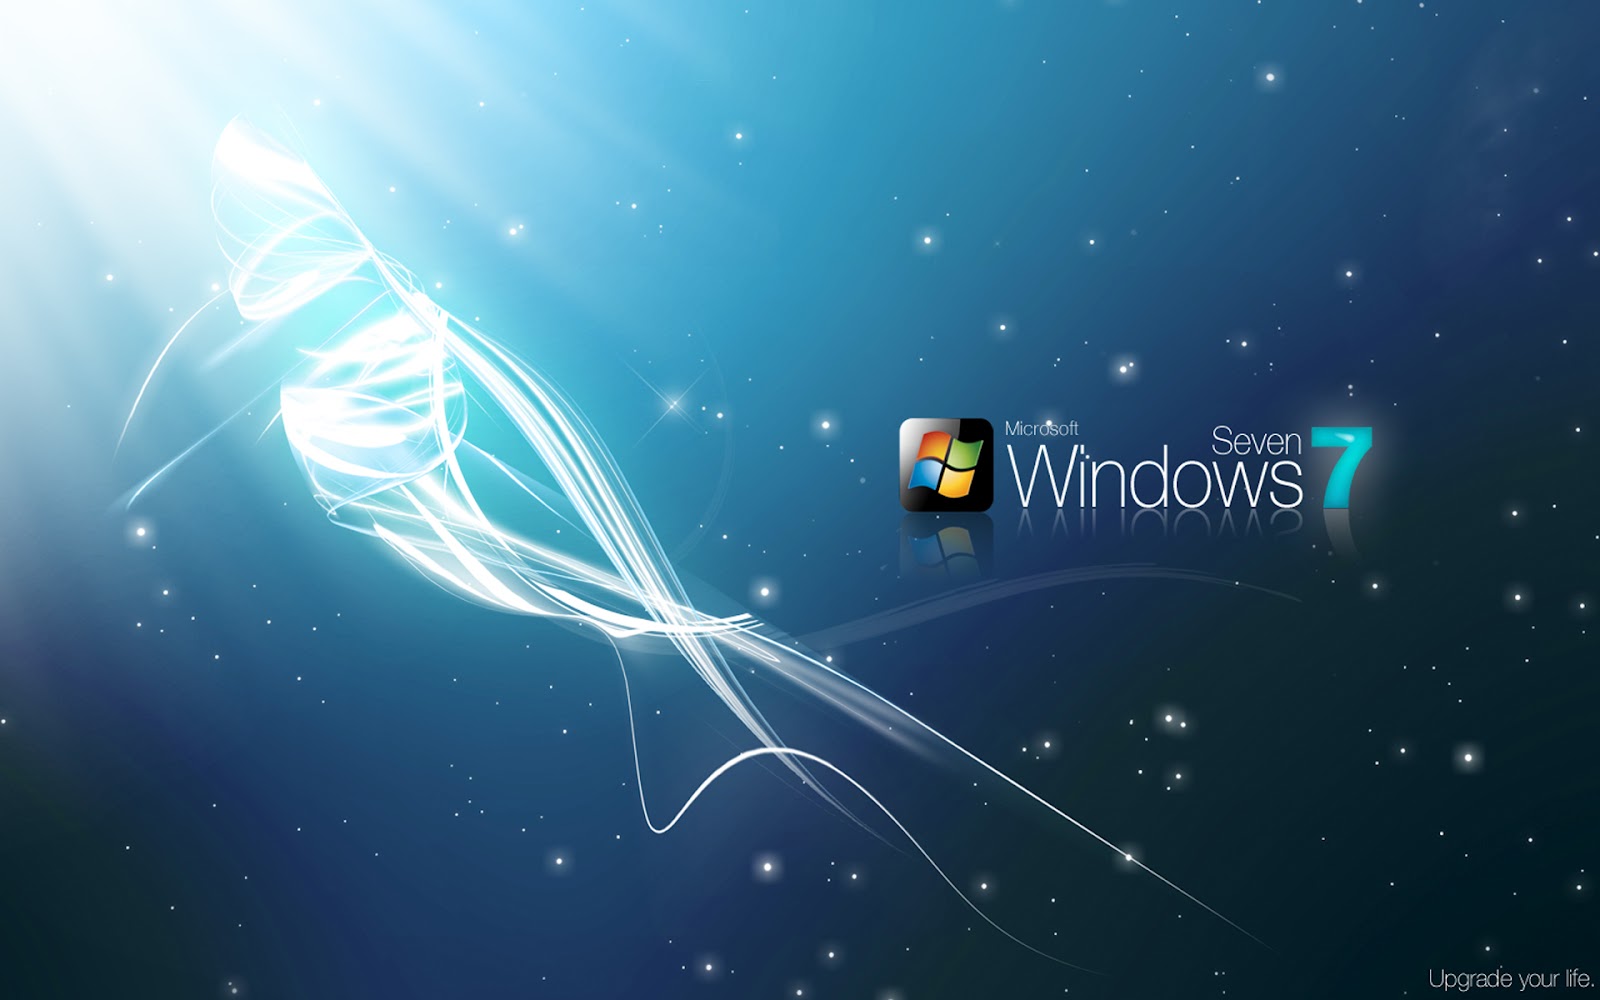 hd wallpapers of windows 7 ultimate Unique Things 1600x1000